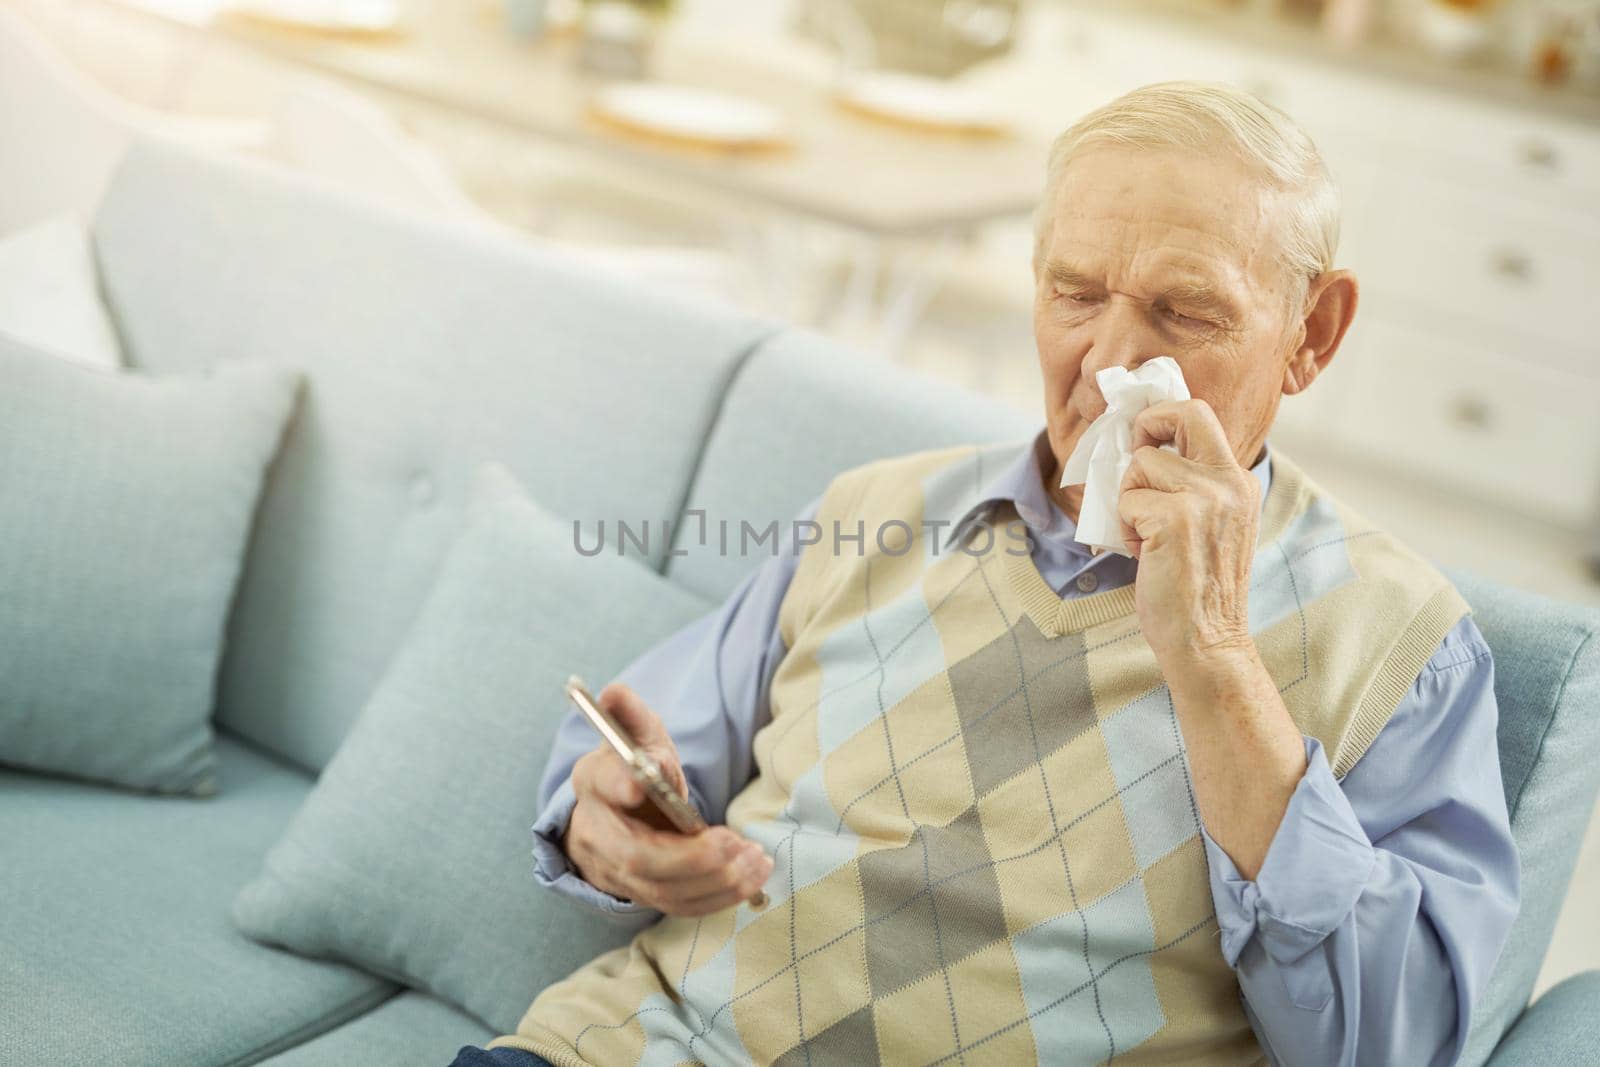 Senior citizen using a paper napkin during an online consultation with a doctor while sitting on the couch